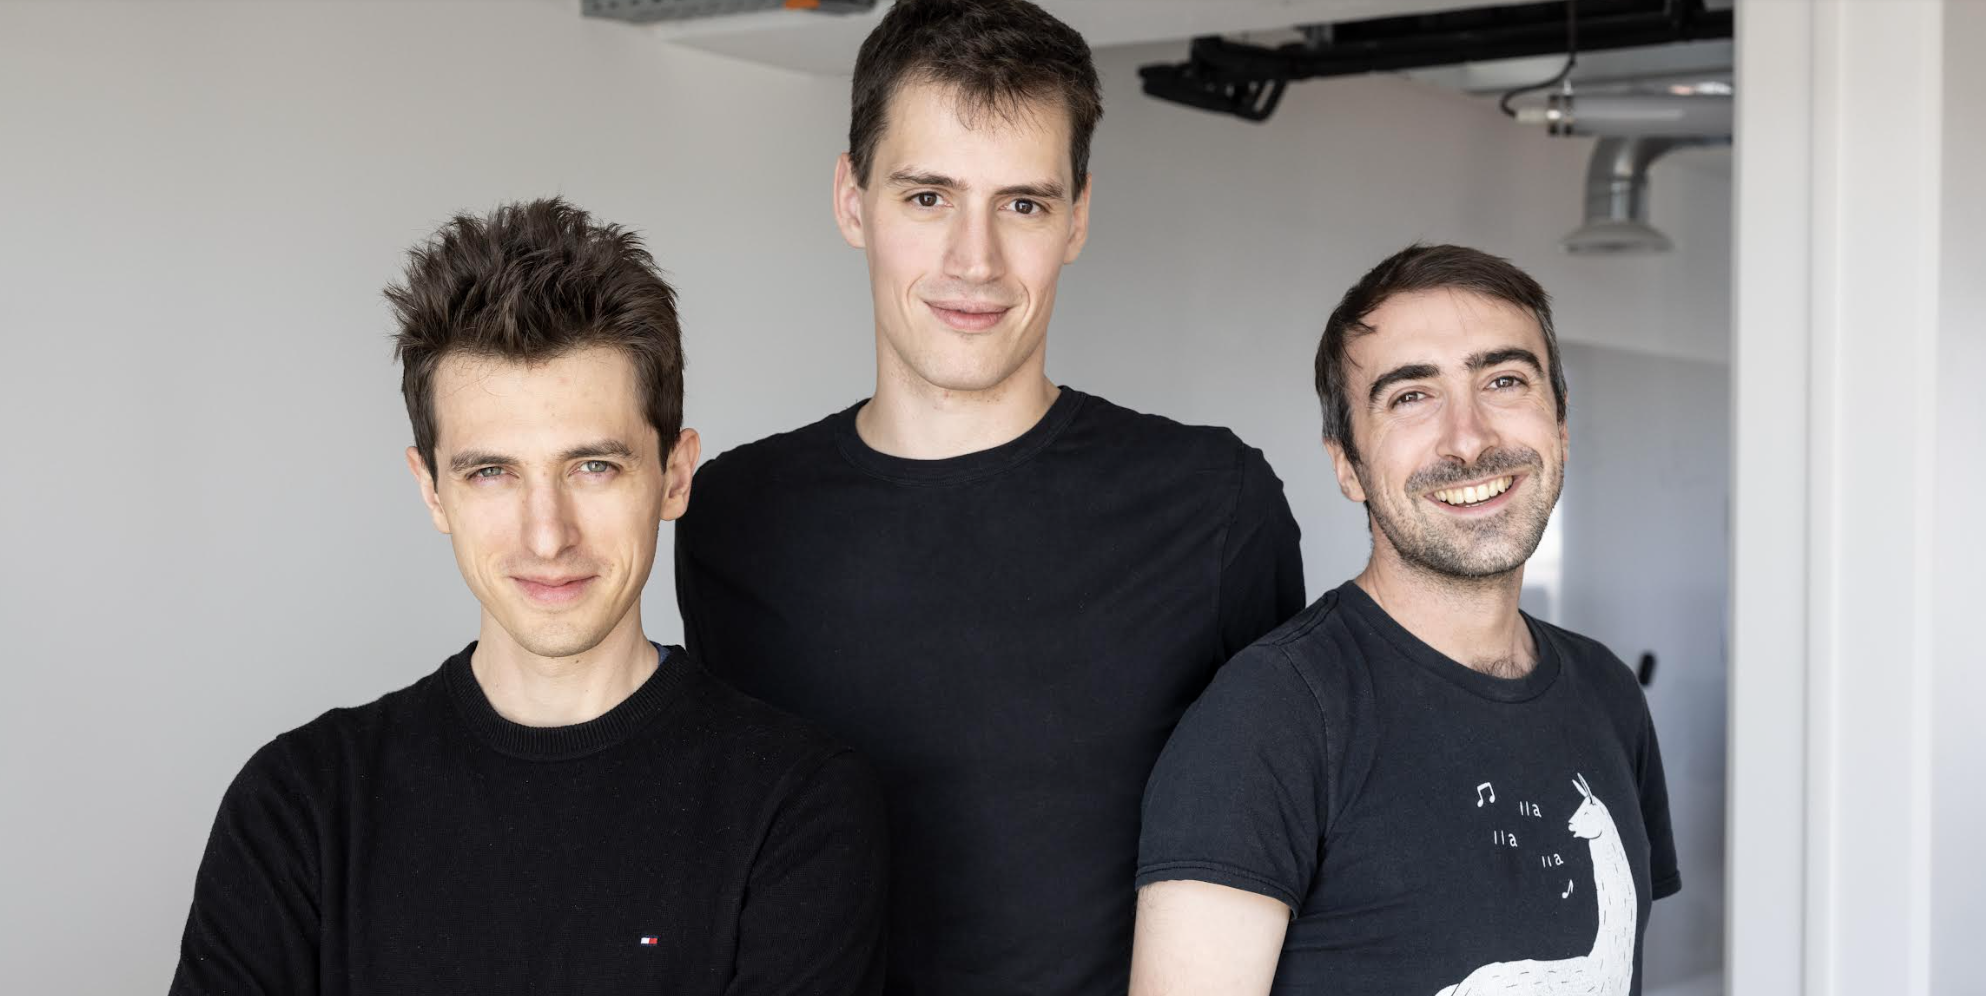 The Mistral AI founding team